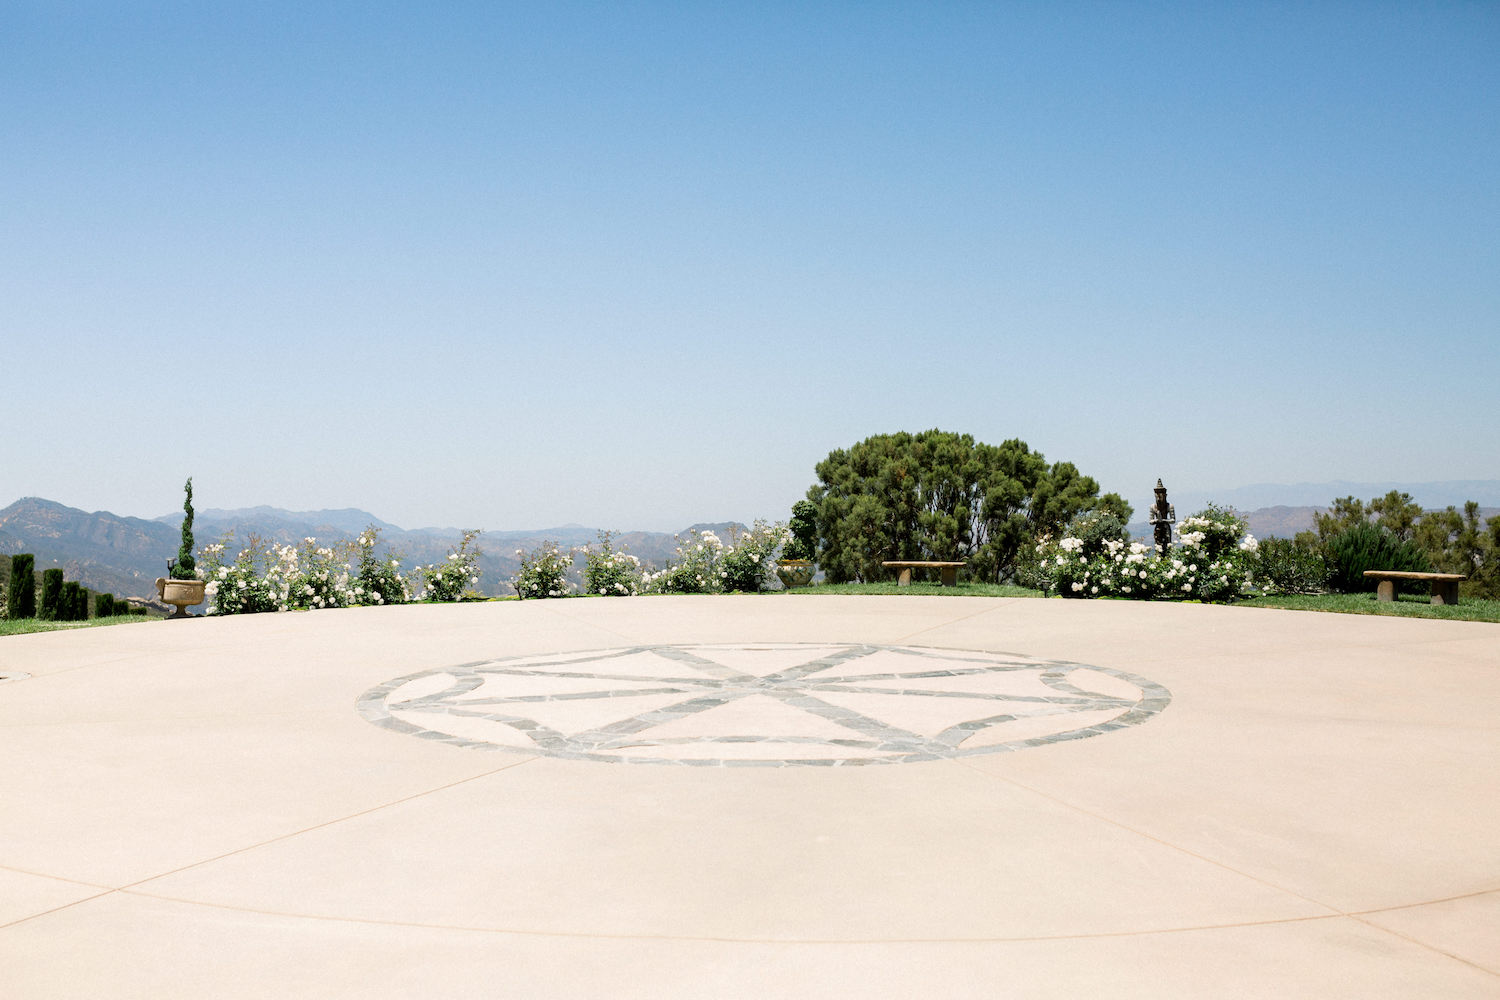 Stone Mountain Estates Luxury Wedding Venue Guide: The helicopter pad surrounded by luscious landscaping and mountains 